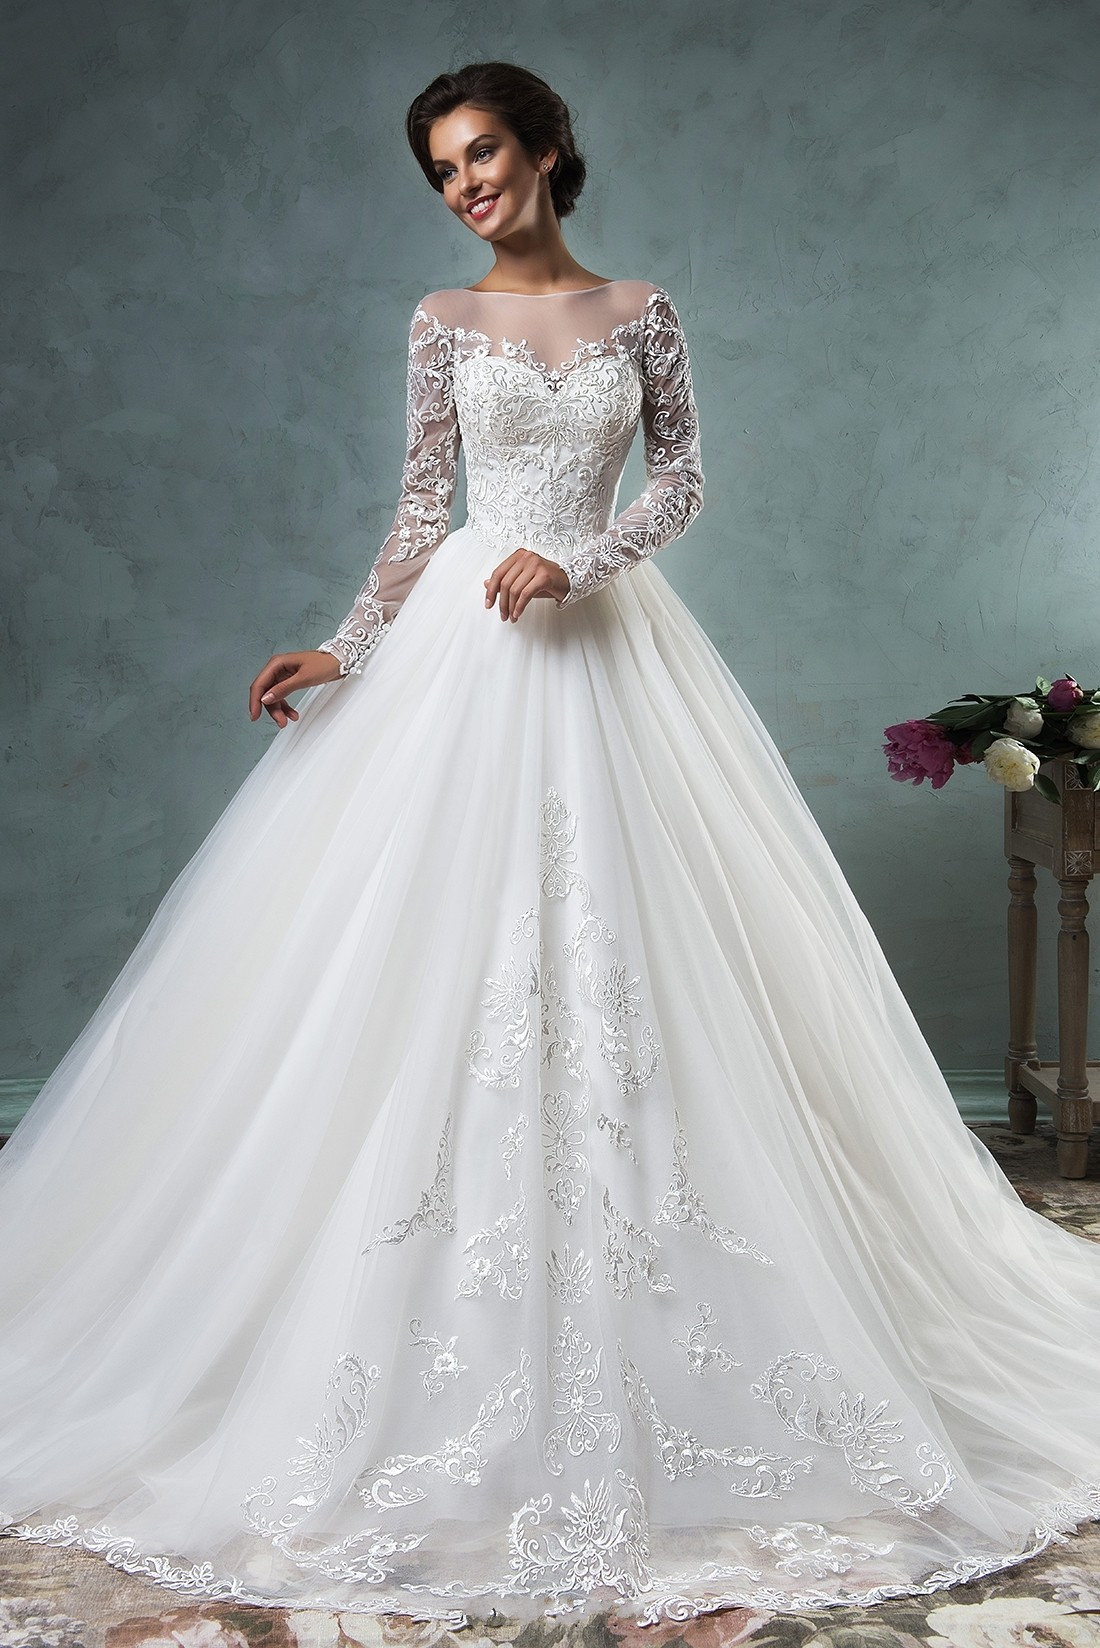 Wedding Dress With Lace Sleeves
 2020 A line Wedding Dresses Sheer Neck Lace Long Sleeves